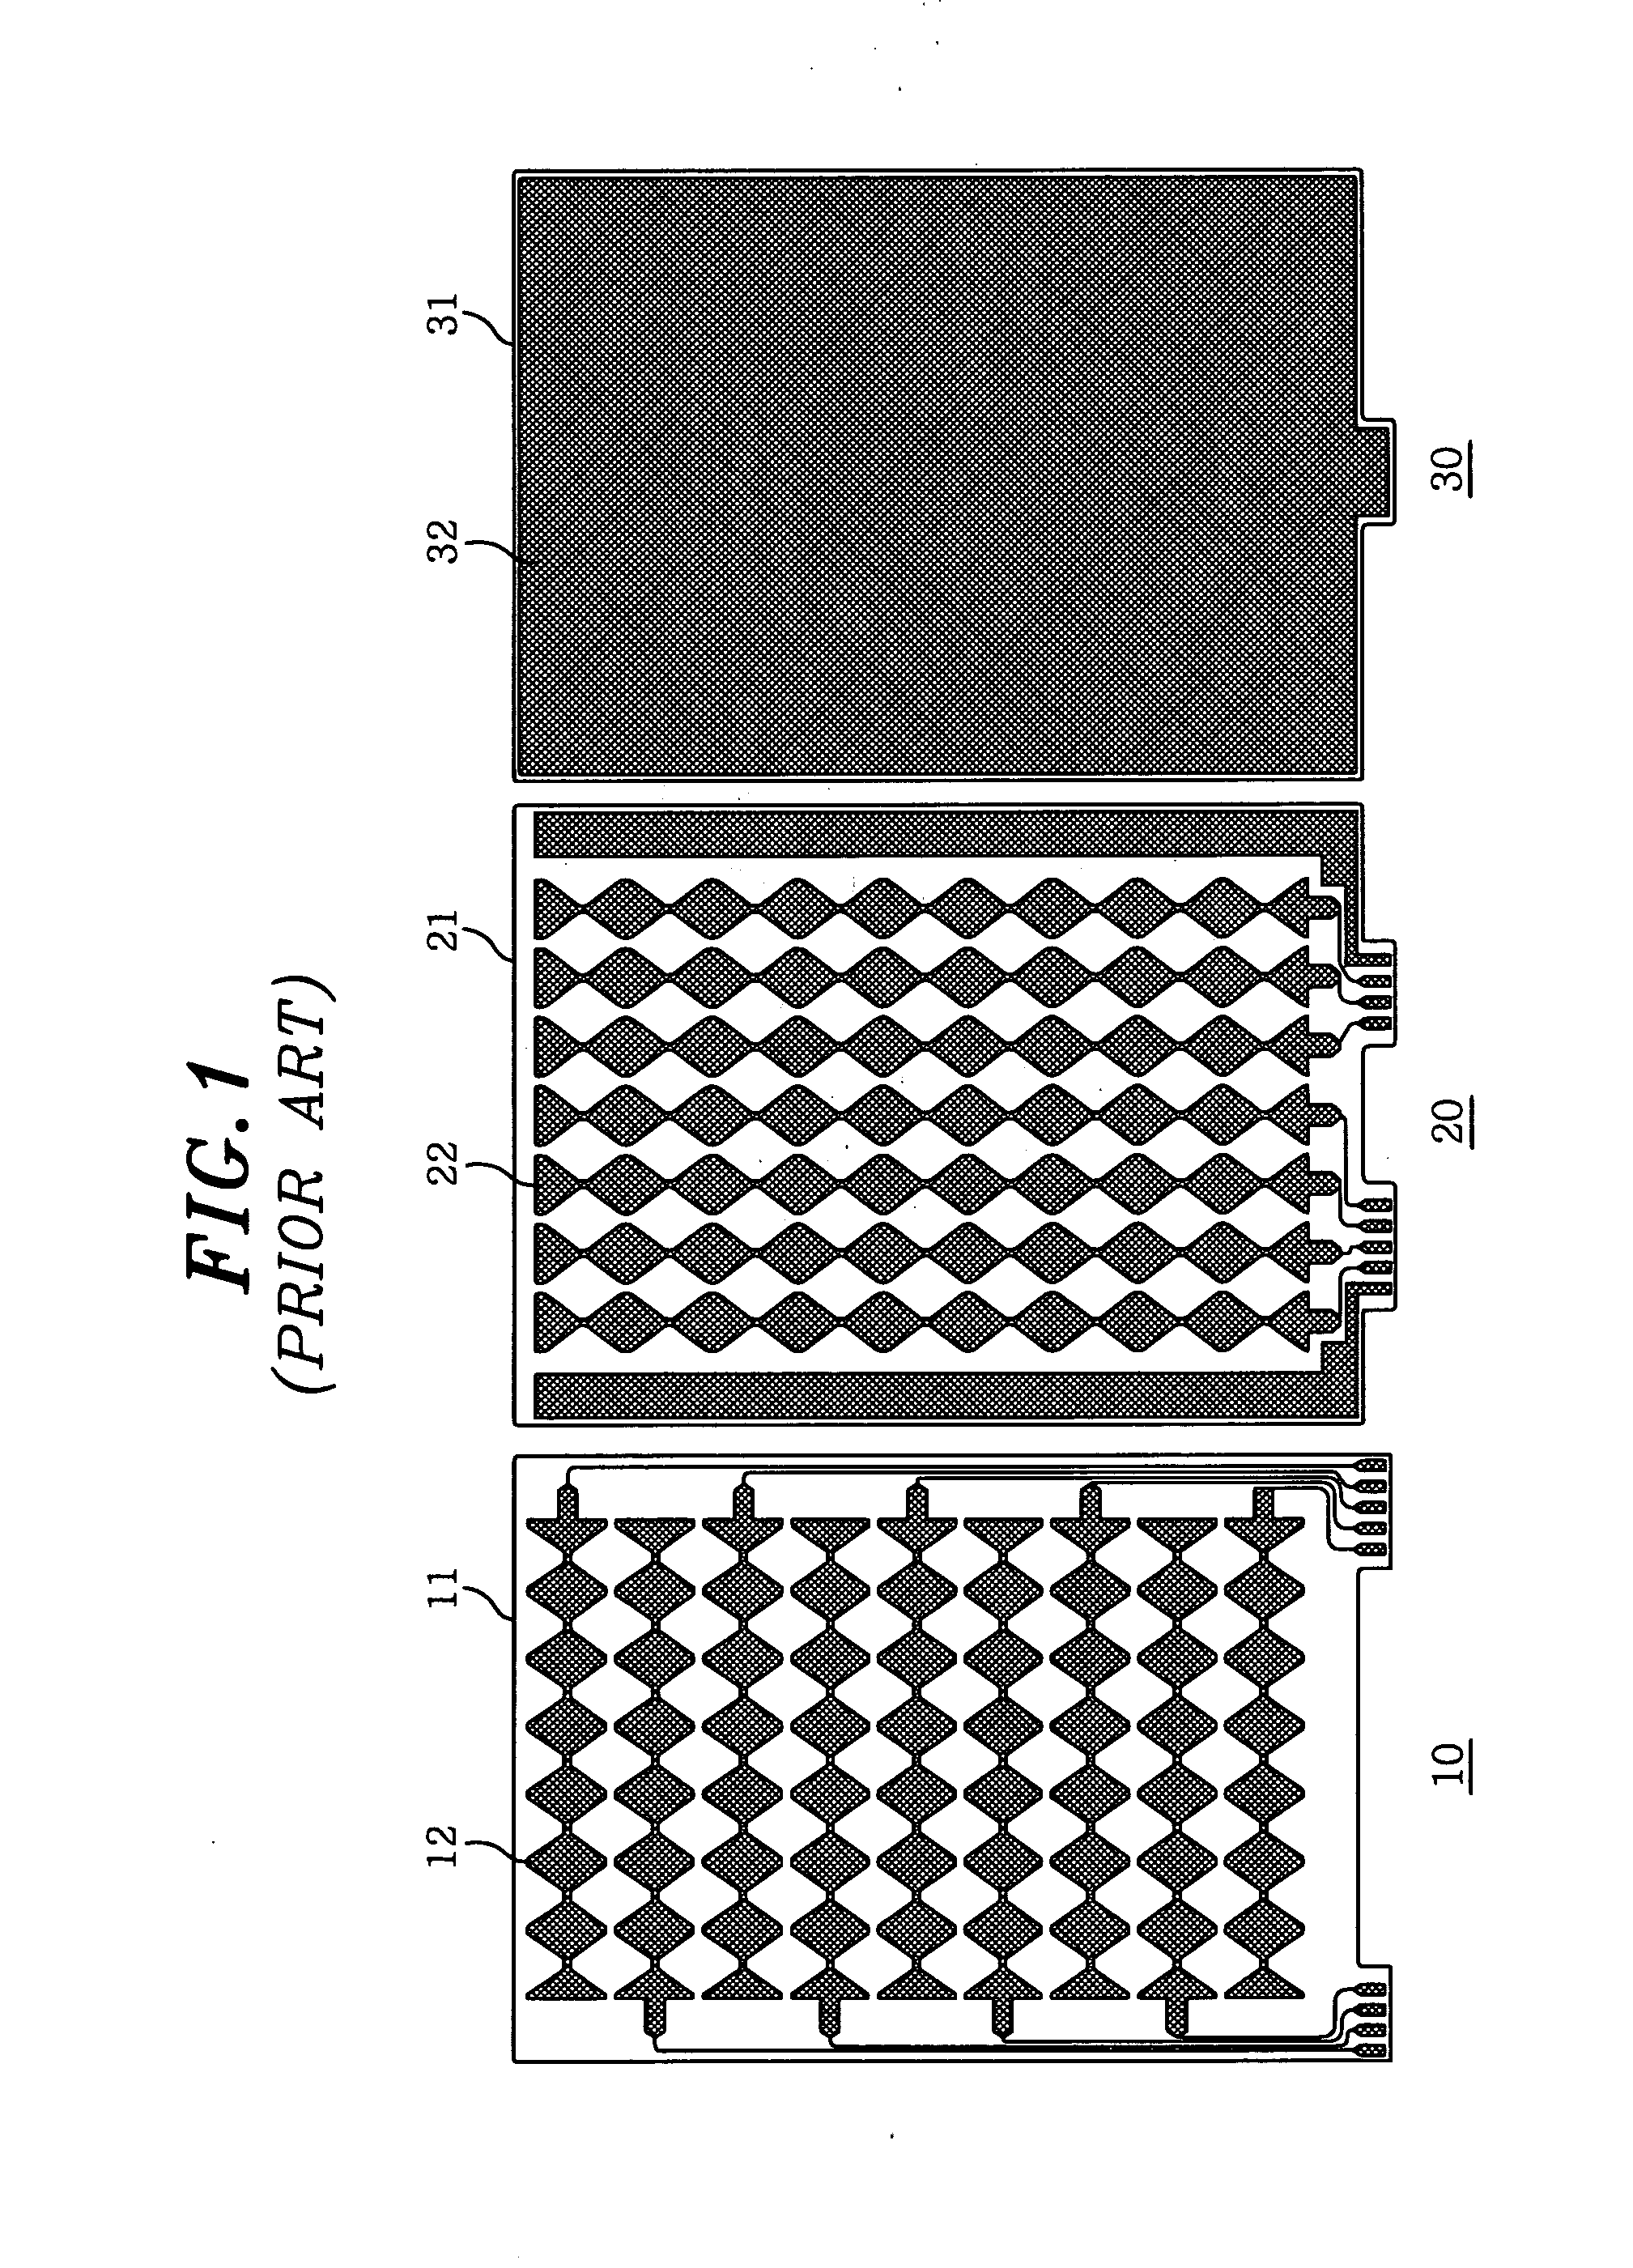 Touch location detecting panel having a simple layer structure